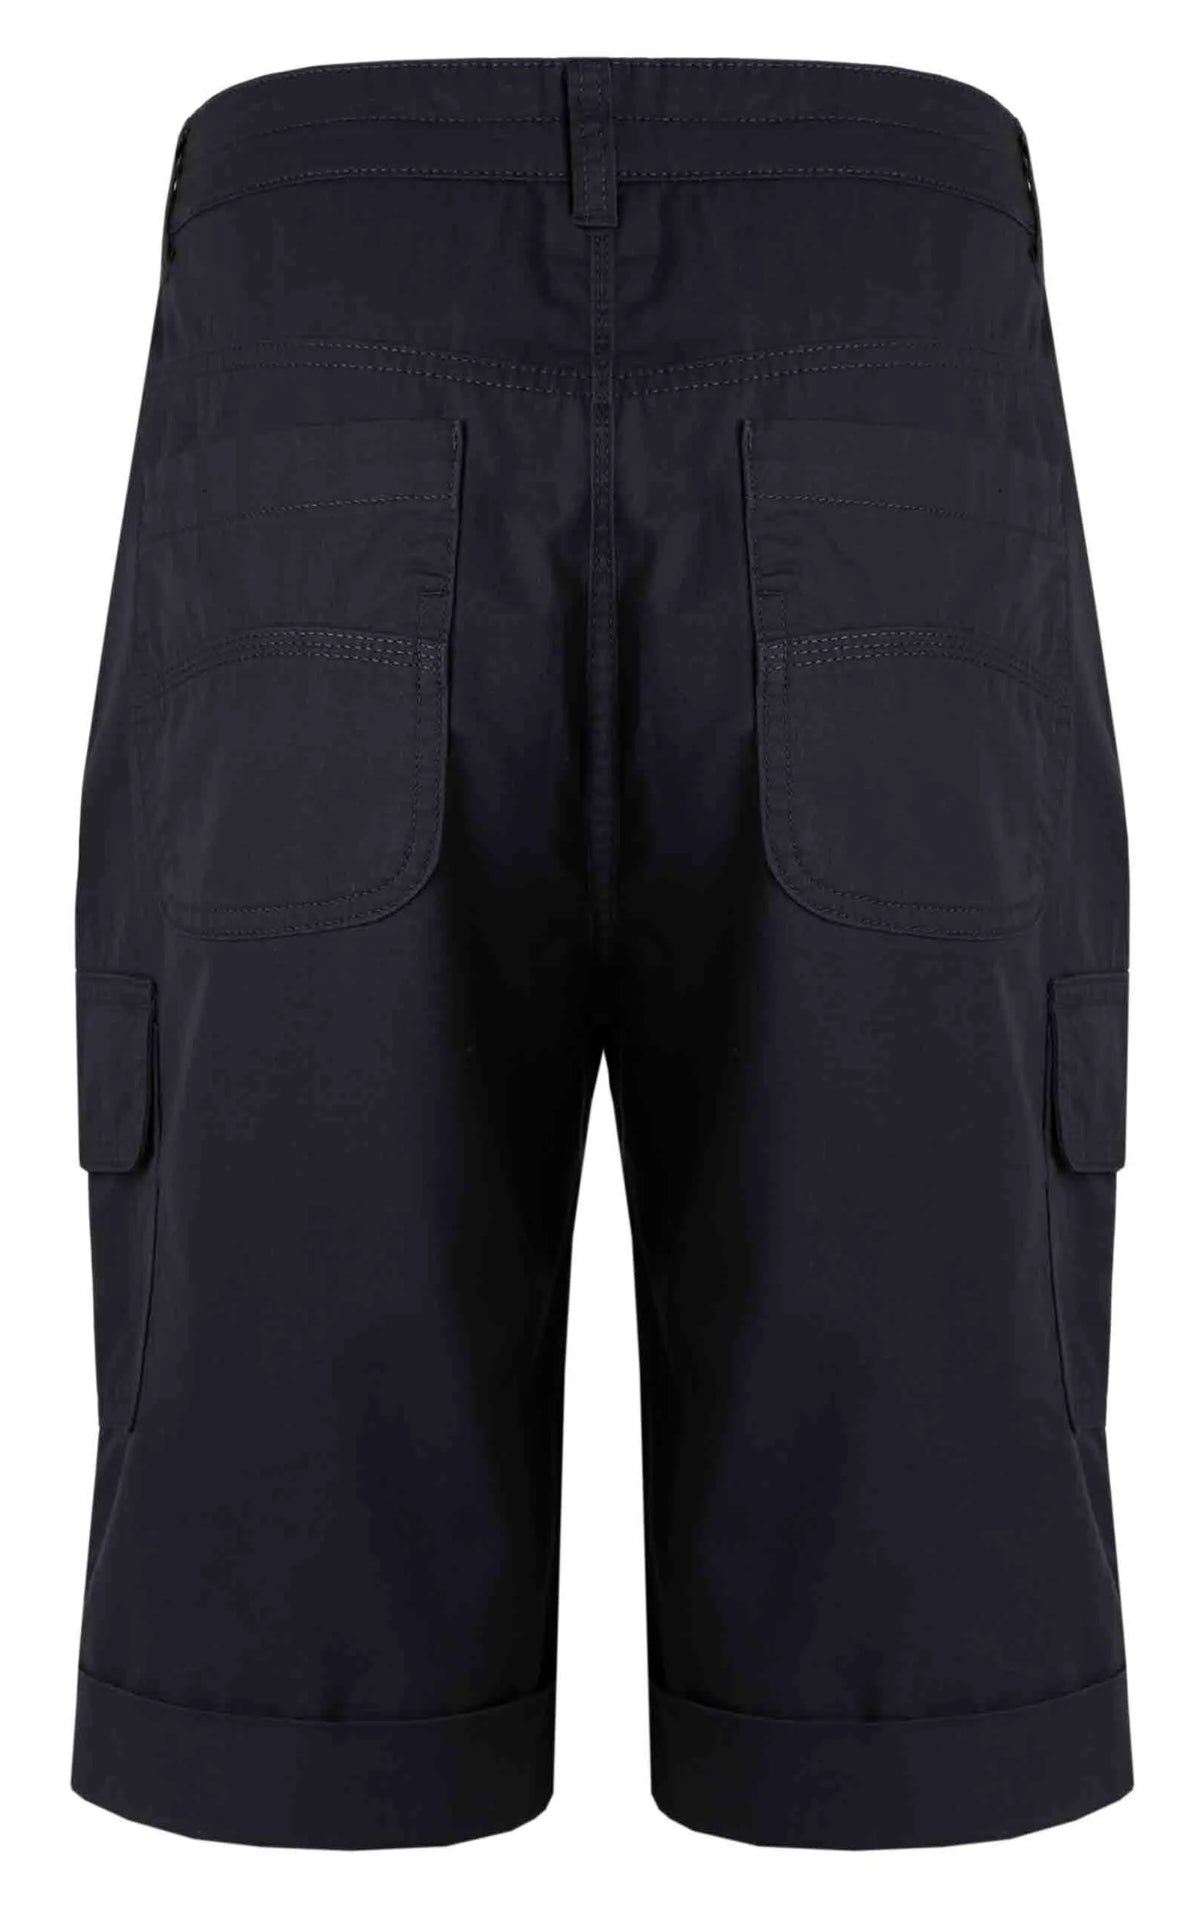 Women's Rhae cargo shorts in Navy from Weird Fish with side pockets.